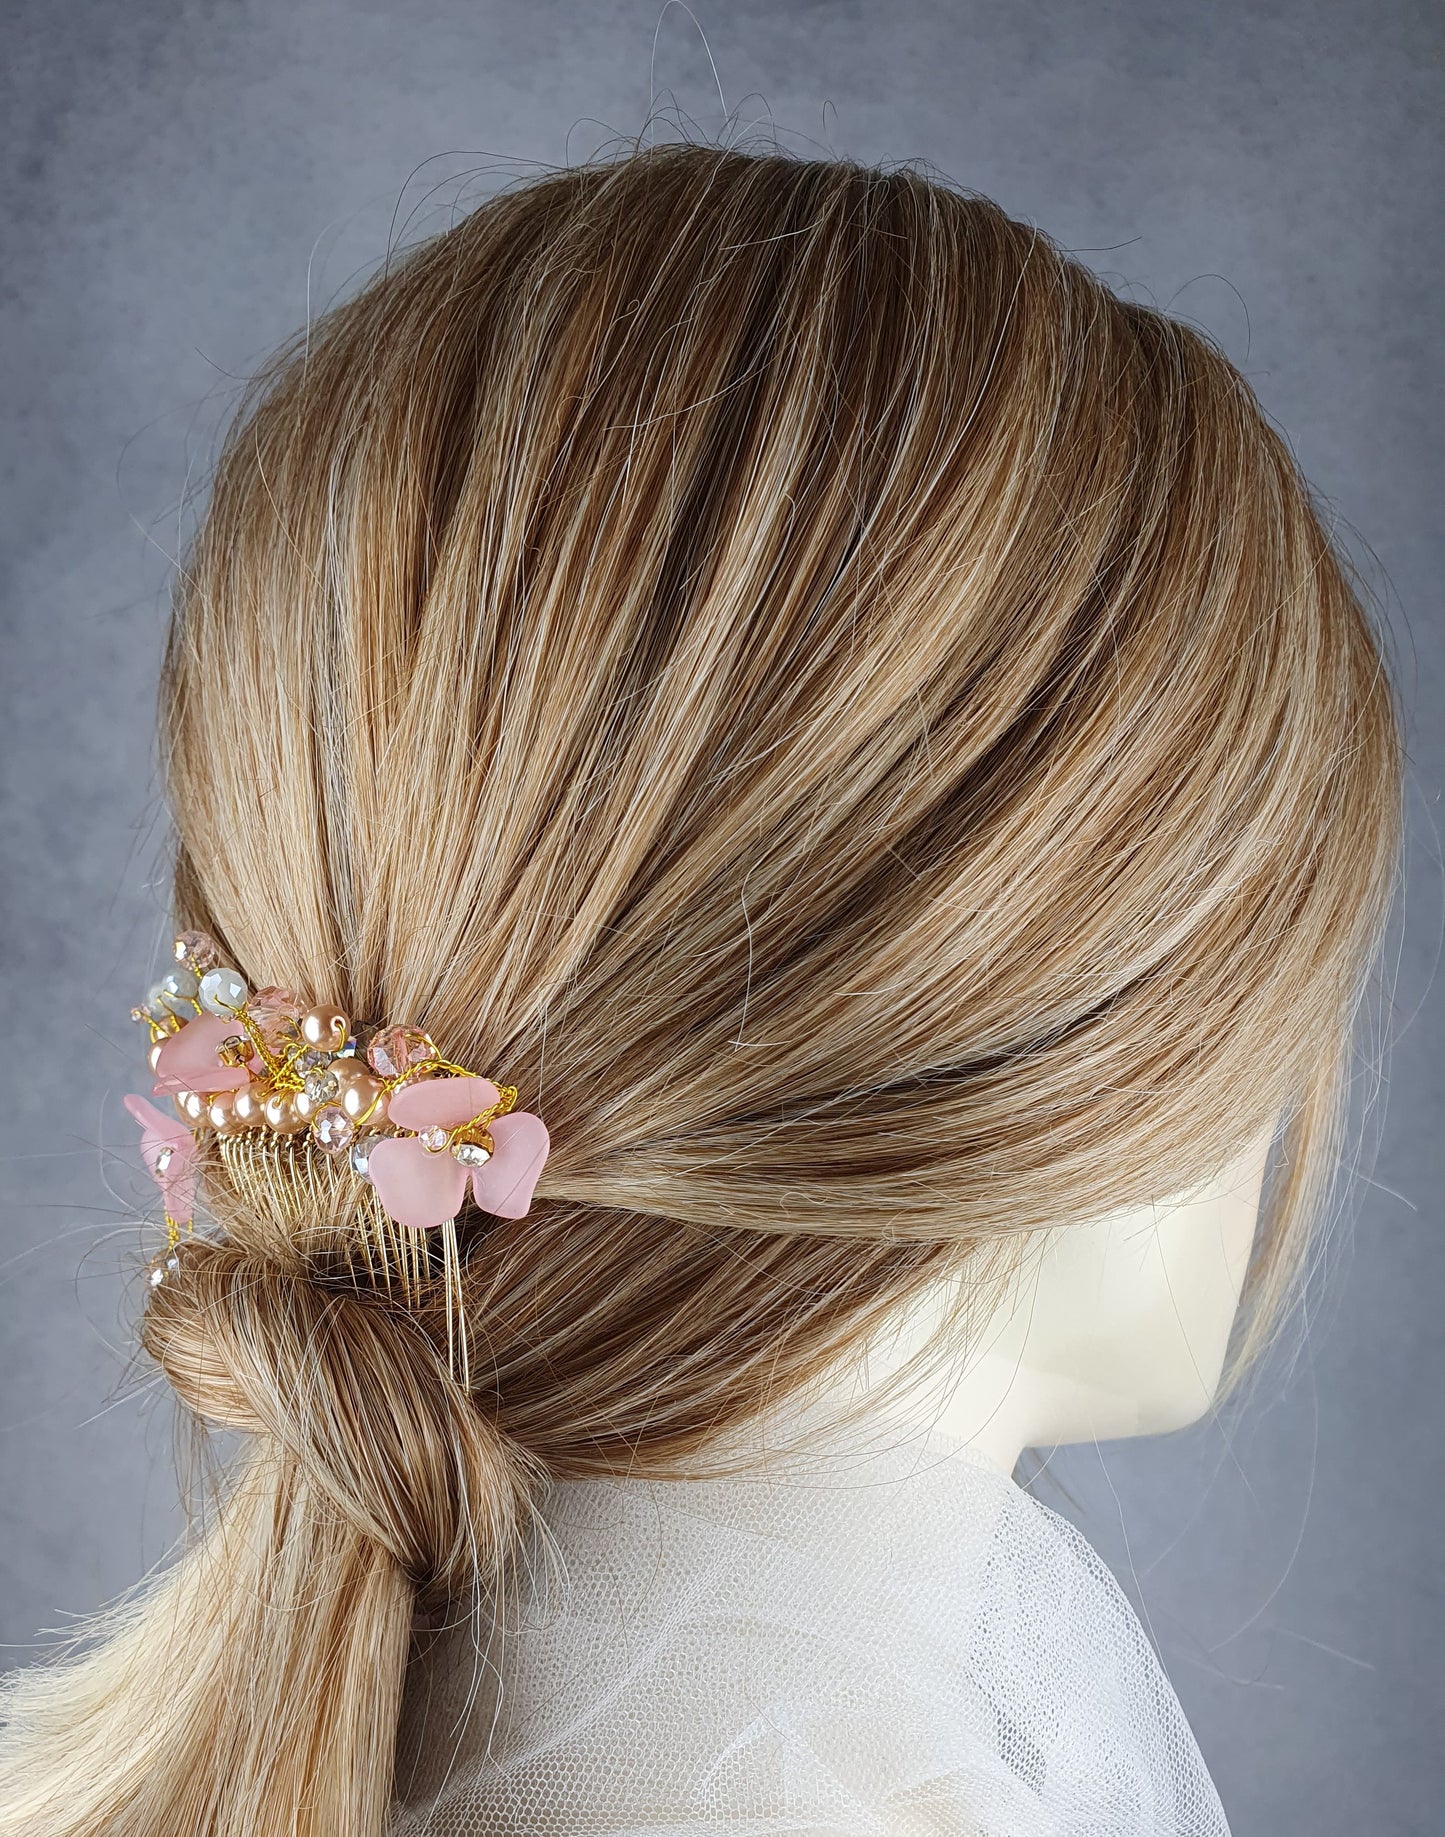 Handmade bridal comb with freshwater pearls -Elegant hair accessory for weddings, fujiyuan metal comb, guests and parties